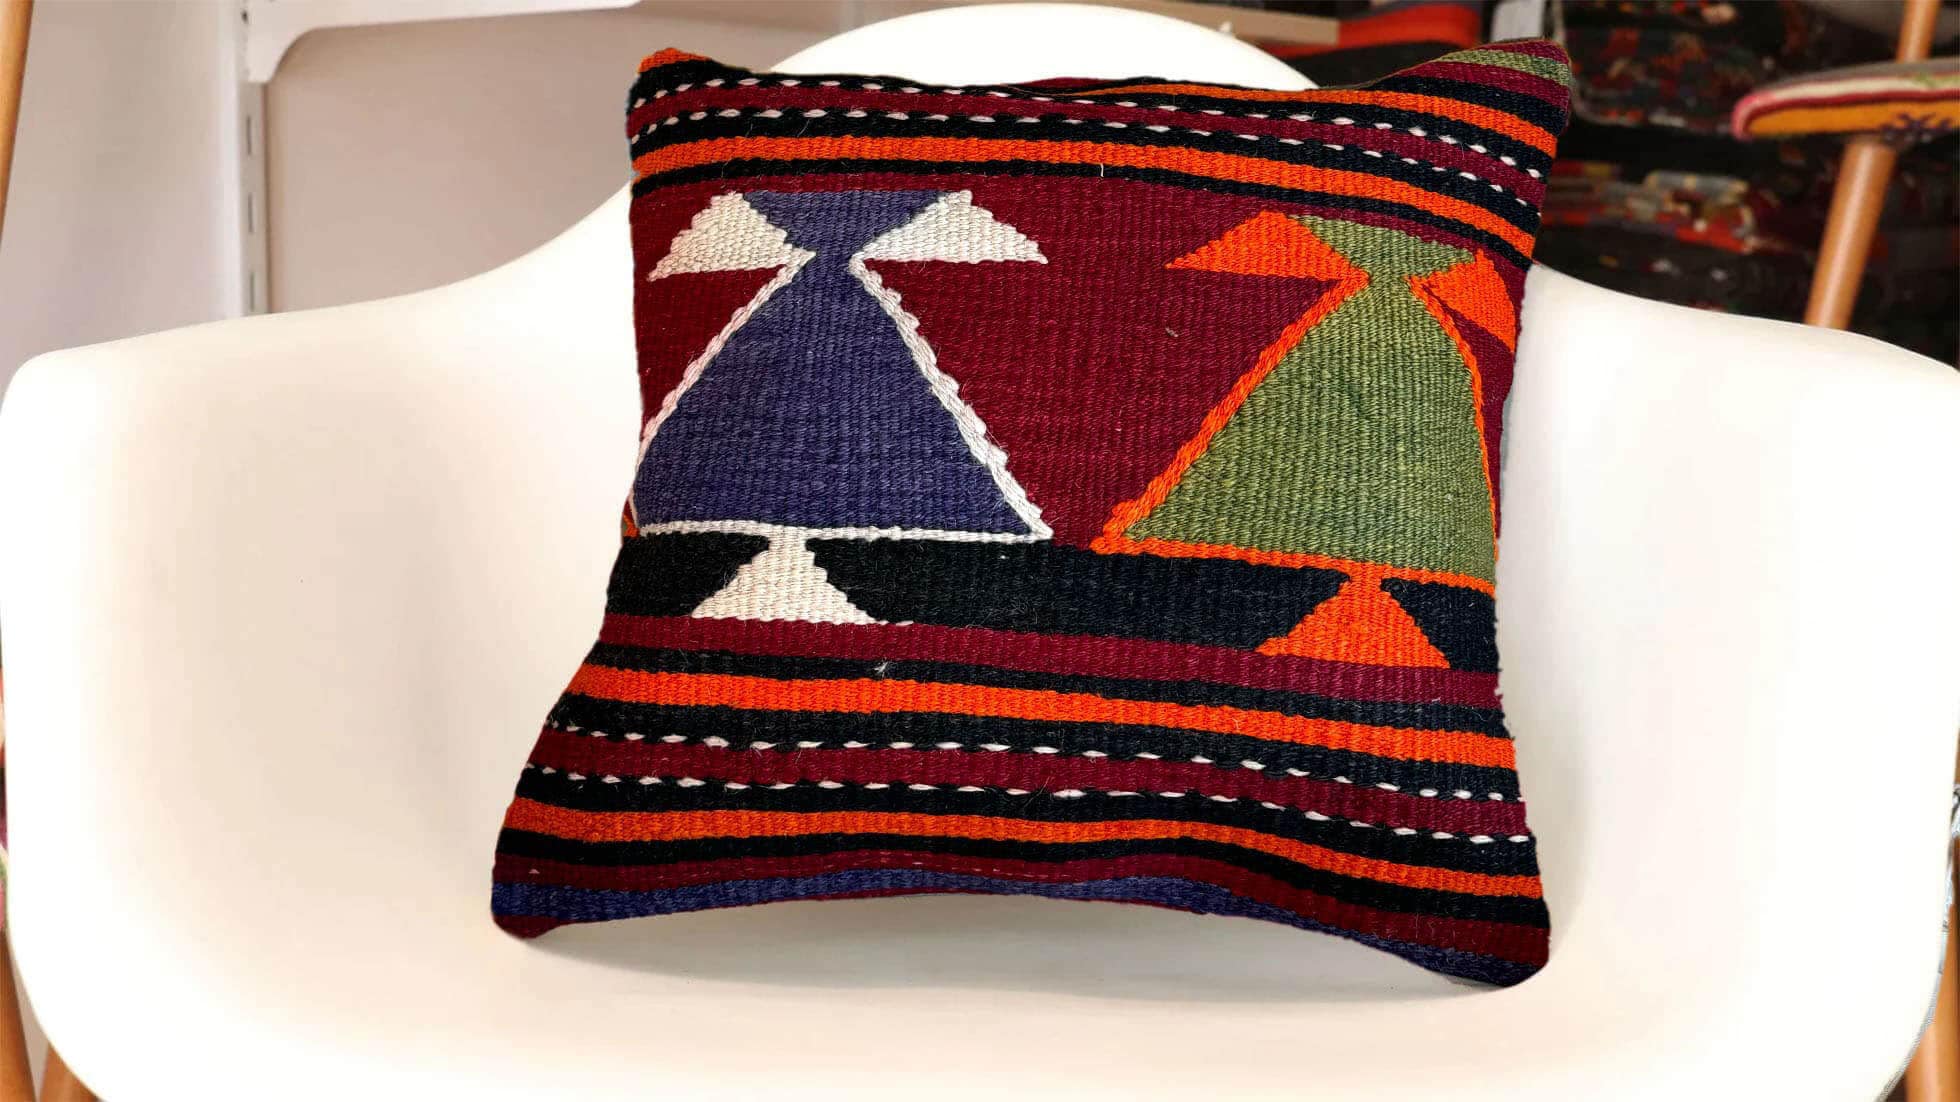 Vintage Handwoven Kilim Pillow with Tribal Motifs and Stripes from Kilim Couture's Kilim Pillow Collection